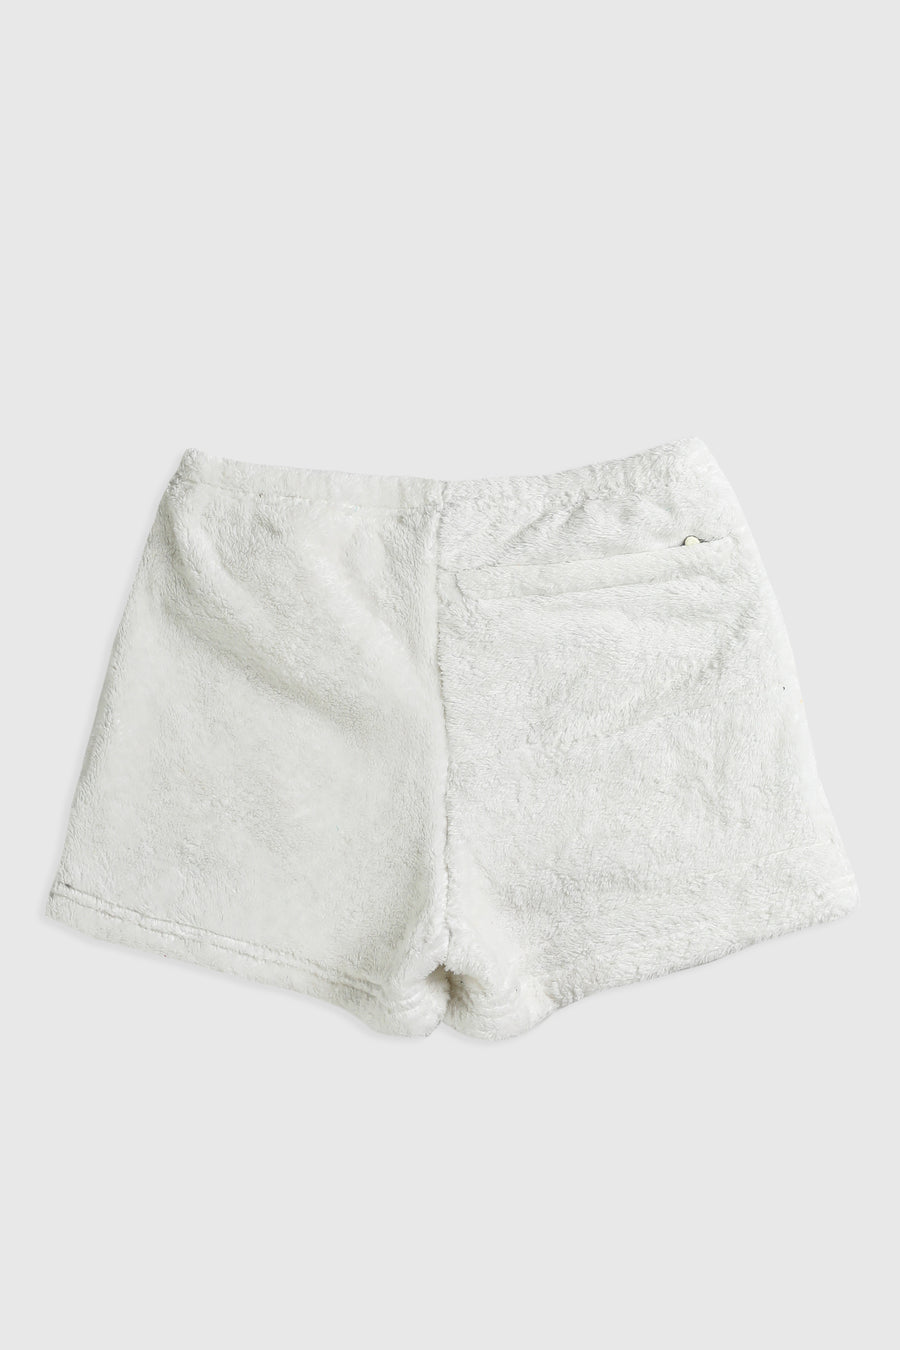 Rework North Face Fuzzy Shorts - XS, S